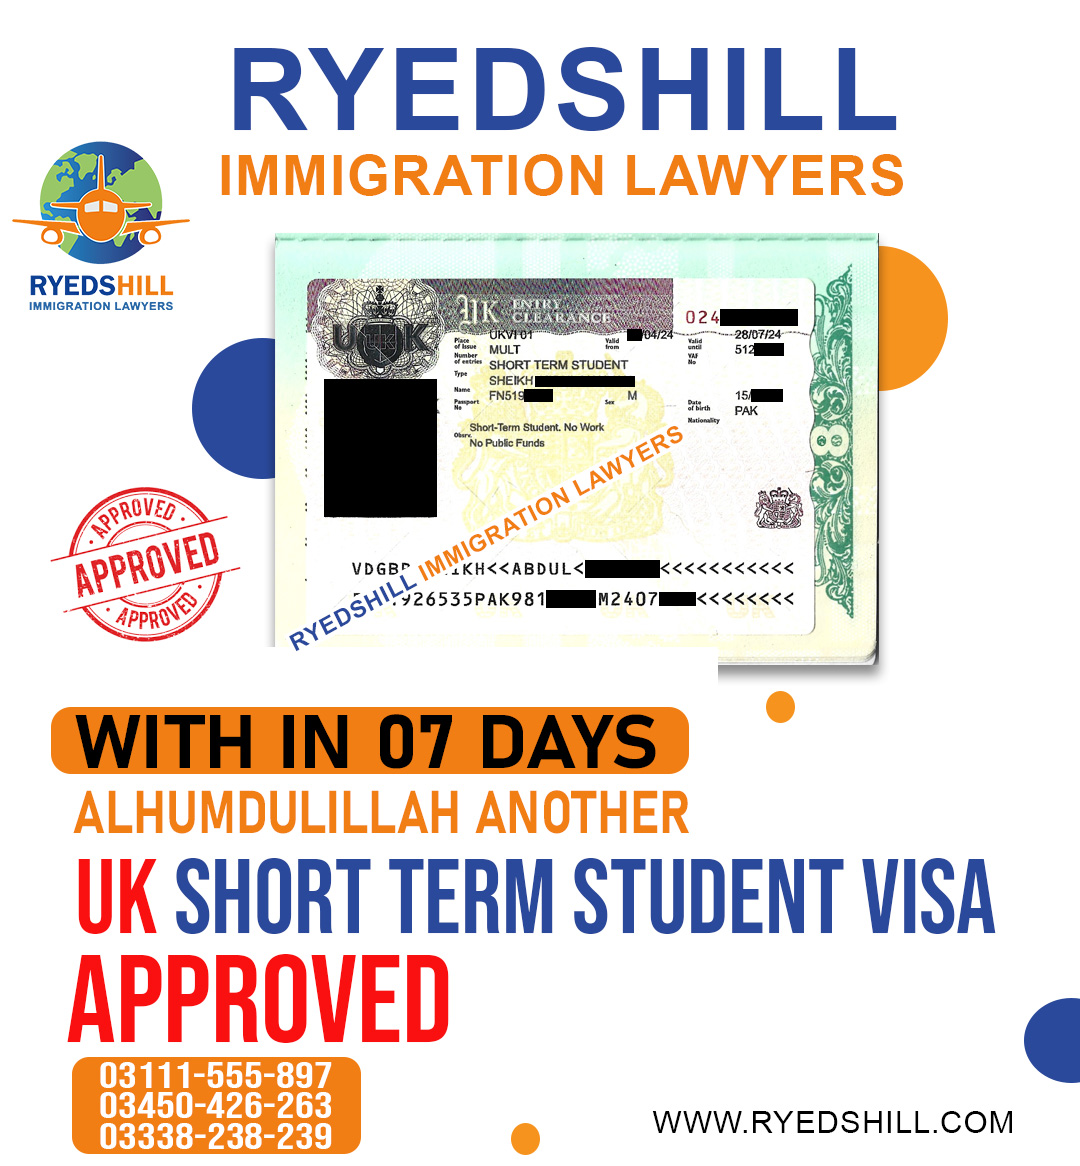 With In 07 Days UK Short Term  Visa Approved through Ryeds Hill Consultants! Proud to assist our client in securing their UK Student Visa for a bright future ahead. #VisaSuccess #RyedsHillConsultants #StudentVisa' #StudyAbroad #Immigration #studyinengland #visa #VisaSuccess